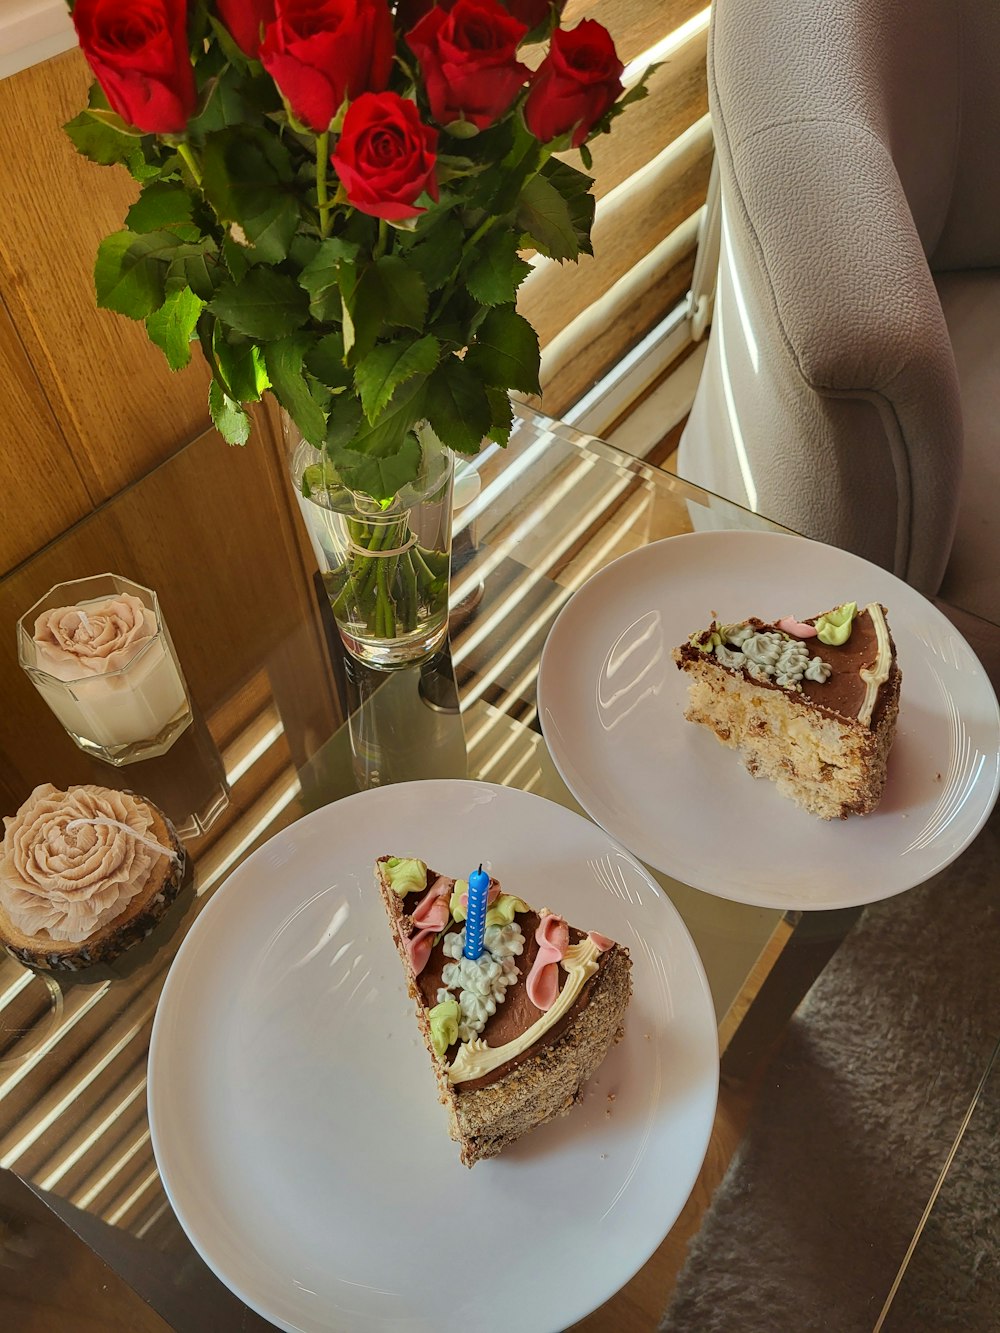 two plates with slices of cake and a vase of roses